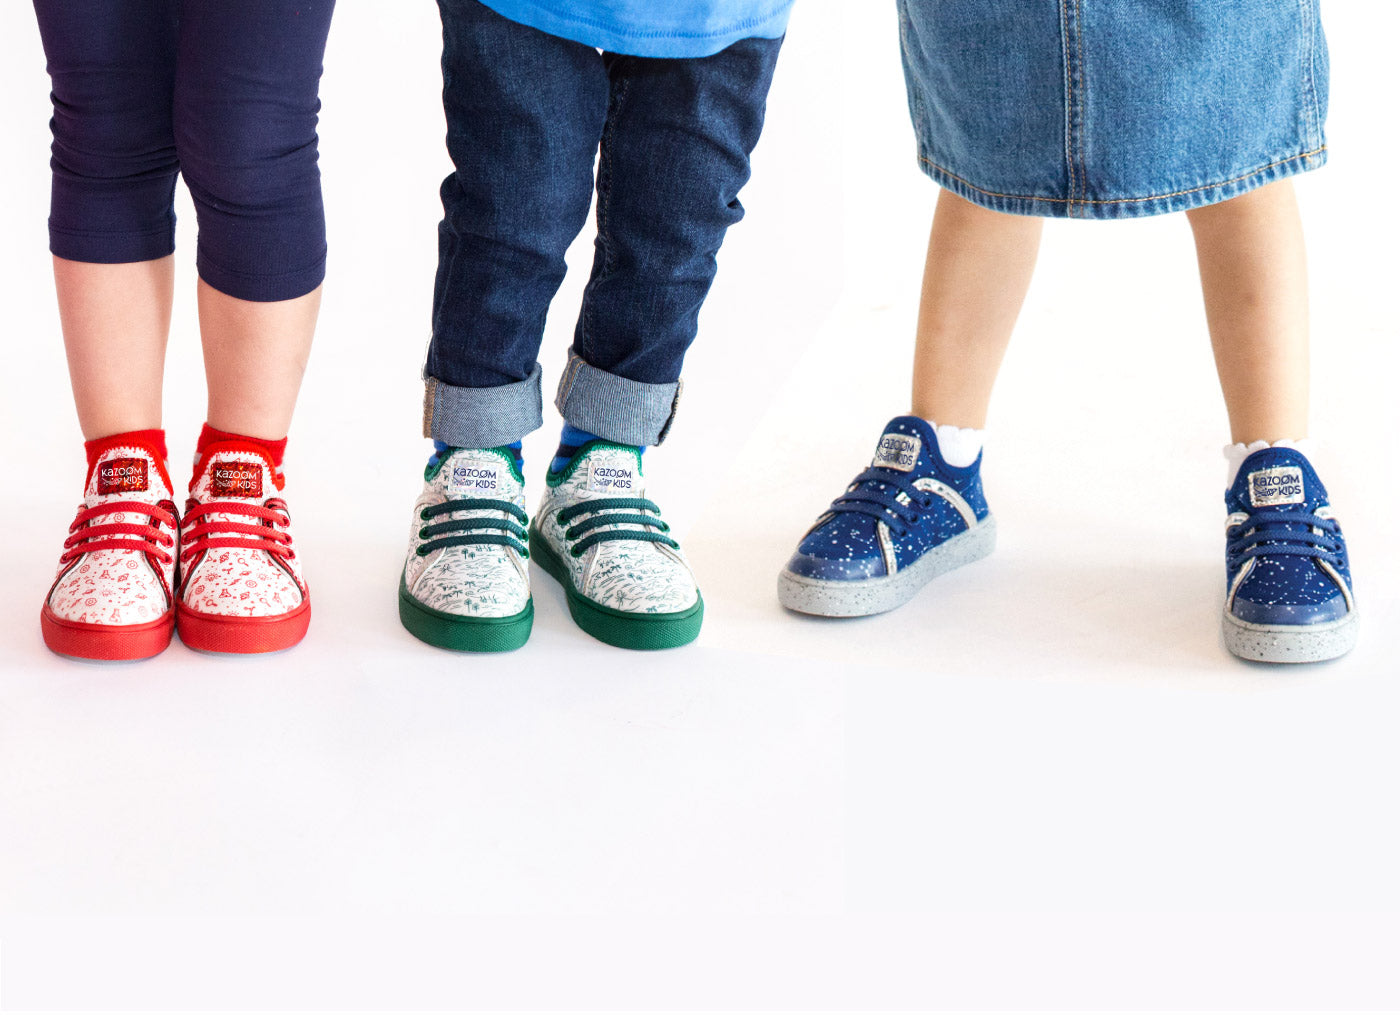 Toddler Girls and Boys Sneakers in Red, Green and Blue Science themes